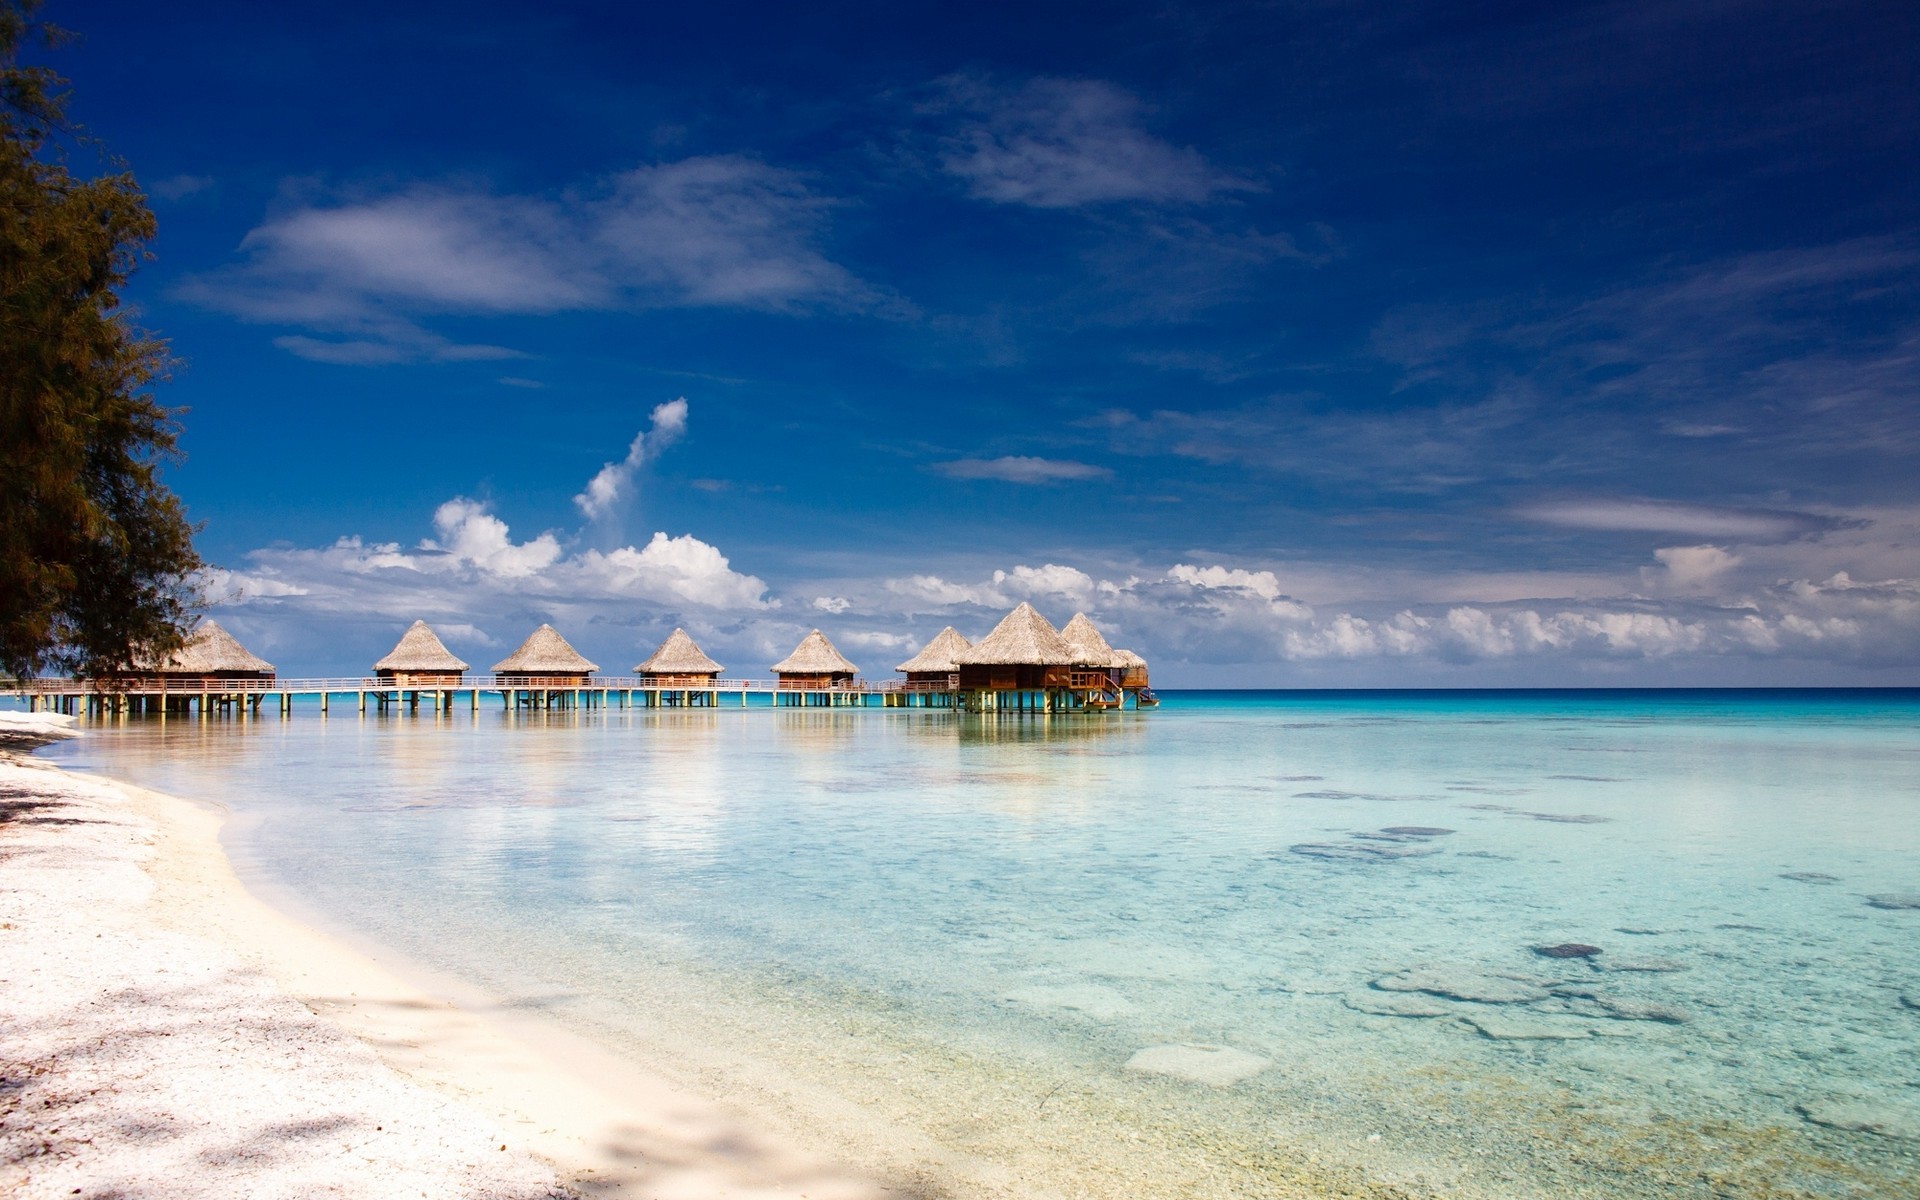 atolls, Island, Beach, French Polynesia, Nature, Landscape, Sea, Clouds, Tropical, Sky, Bungalow, Resort, Summer, Sand, Trees, Vacations Wallpaper